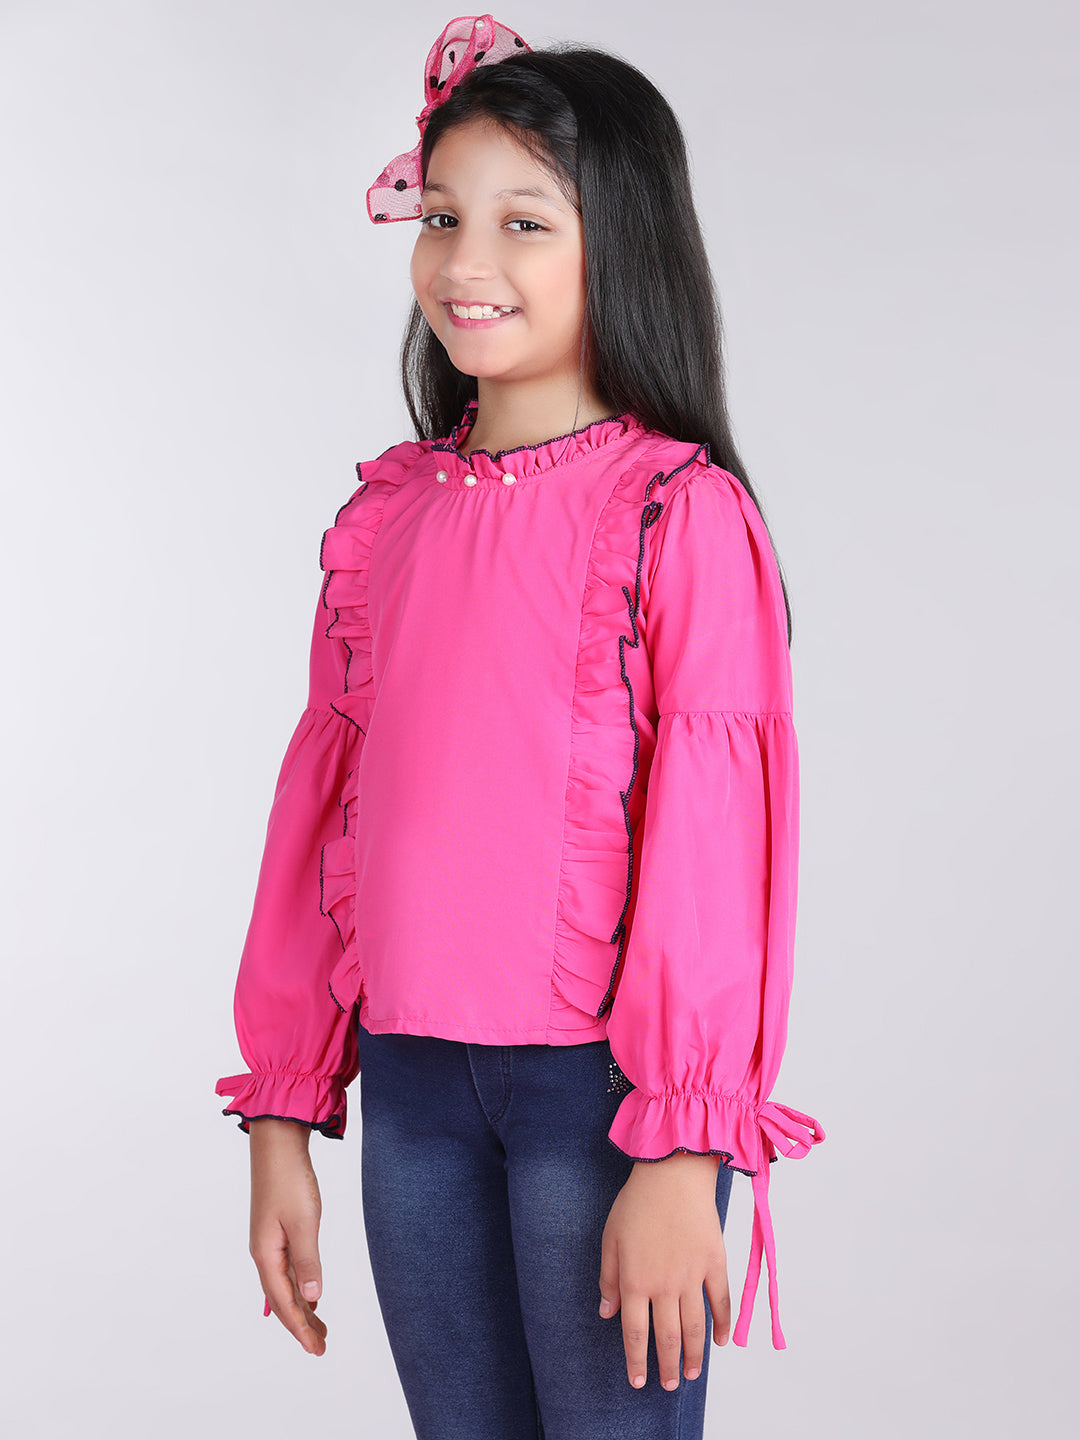 Cutiekins Solid Full Sleeves Polyester Tops-Pink & White